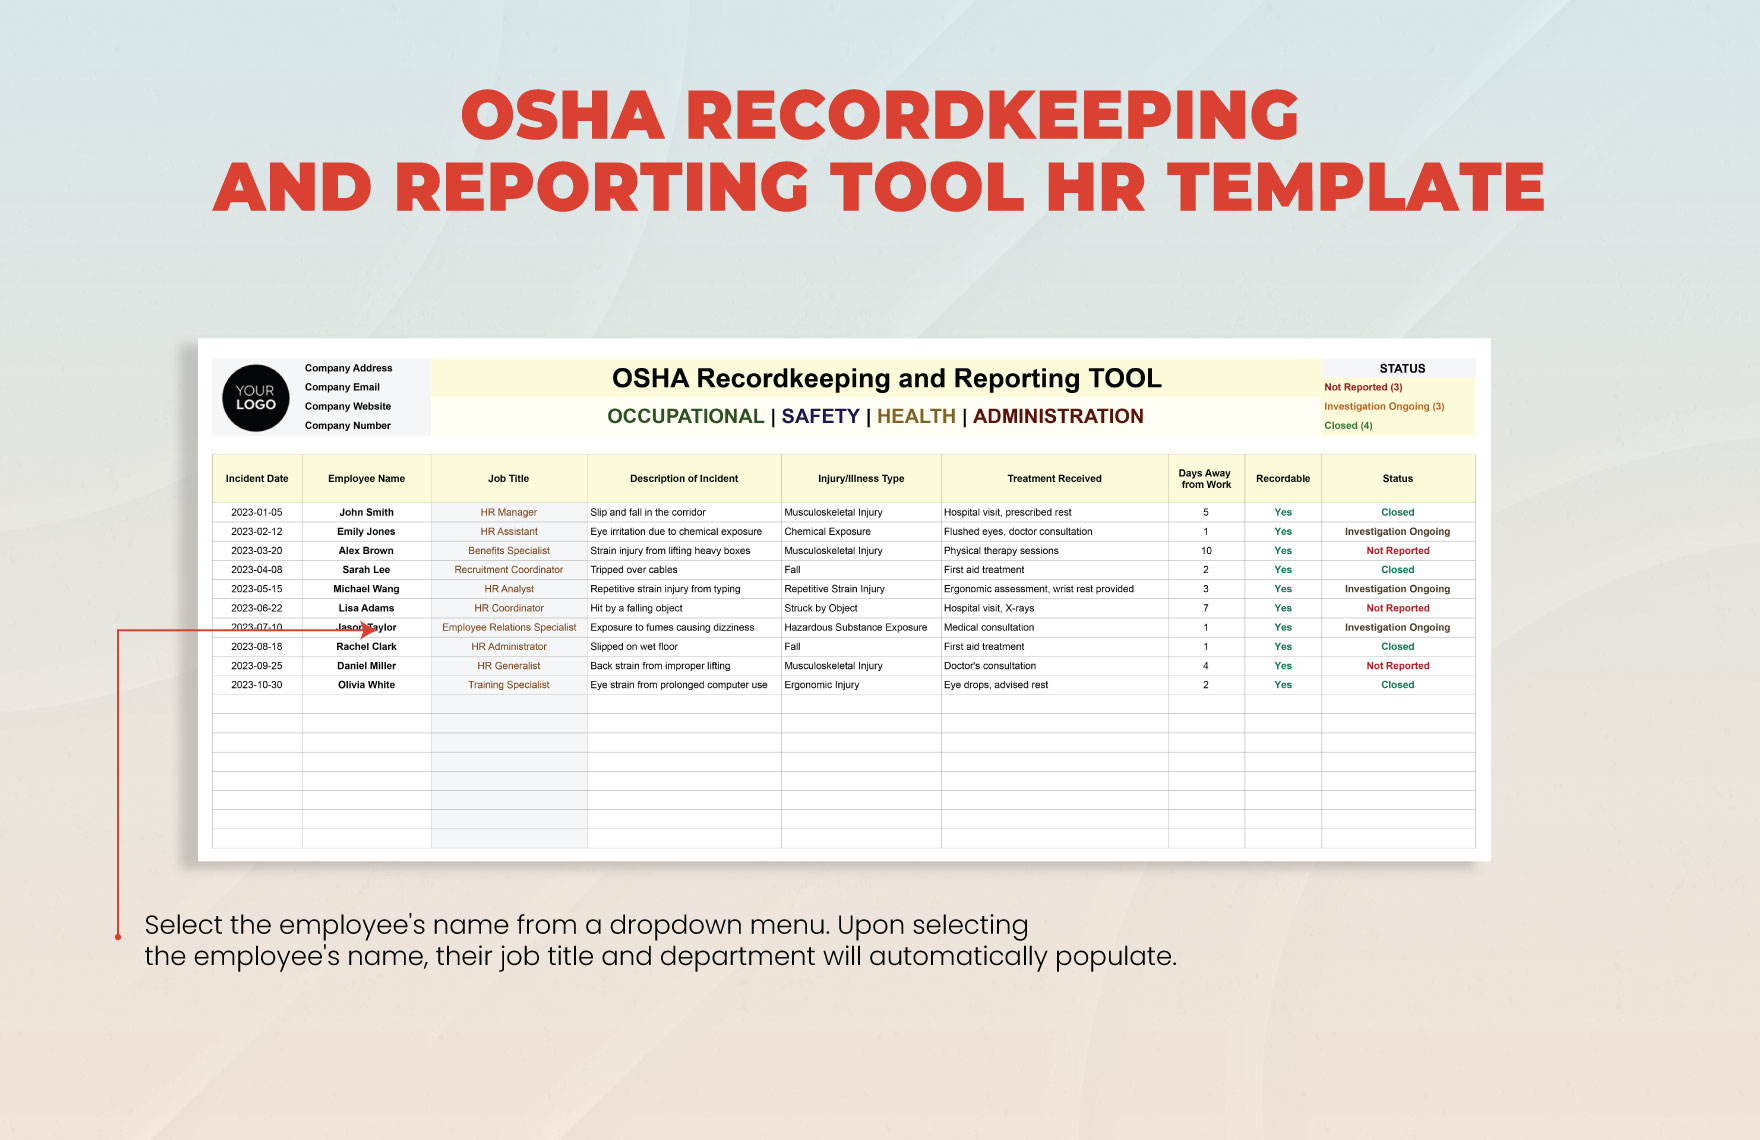 OSHA Recordkeeping and Reporting Tool HR Template